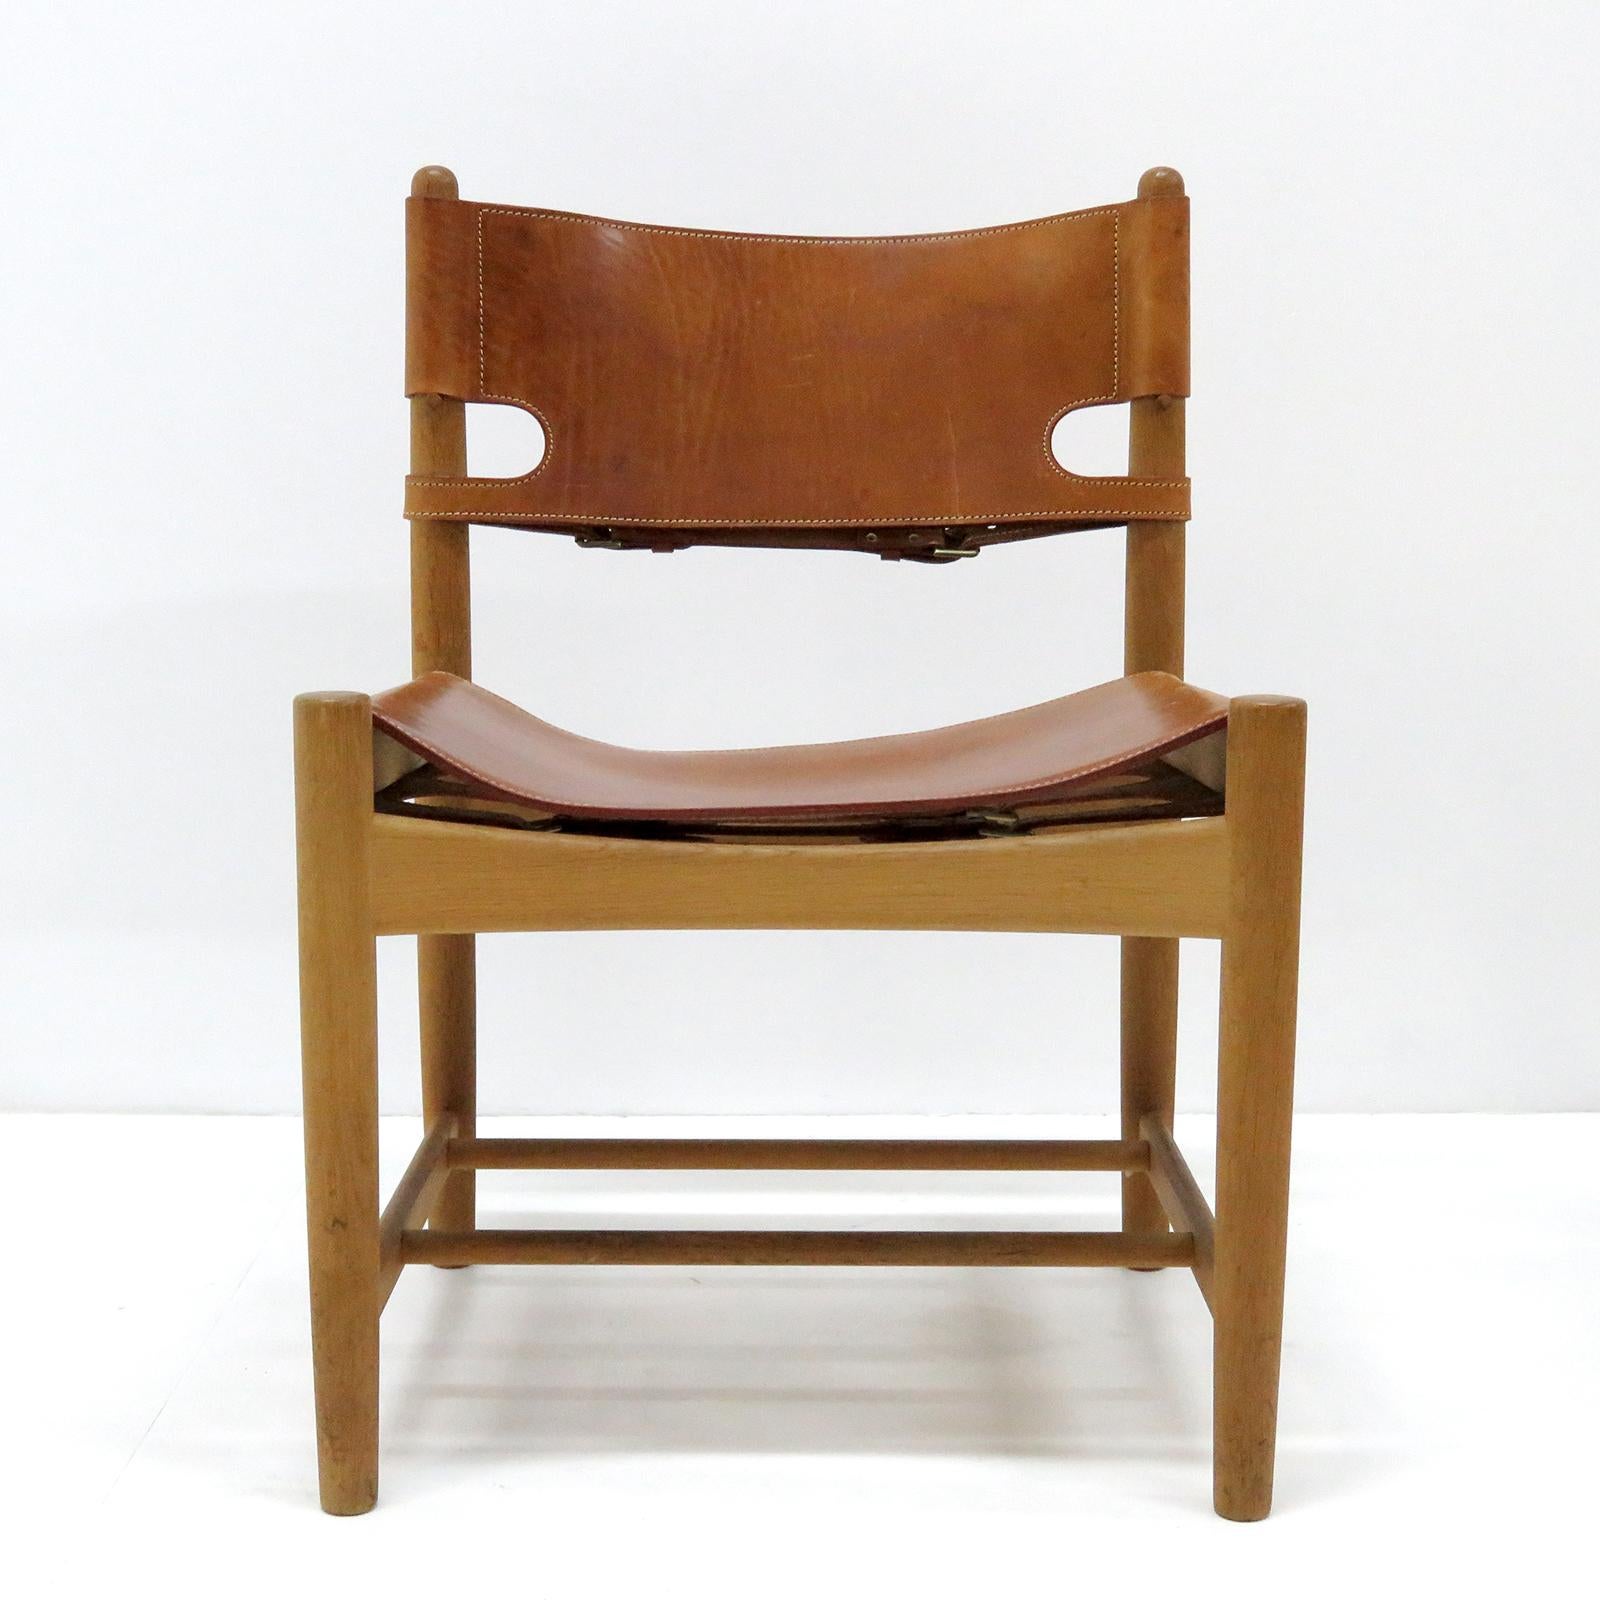 Wonderful set of four Børge Mogensen 'Hunting' chairs, model no. 3237 for Fredericia Furniture, with saddle leather on oak frames, great patina.